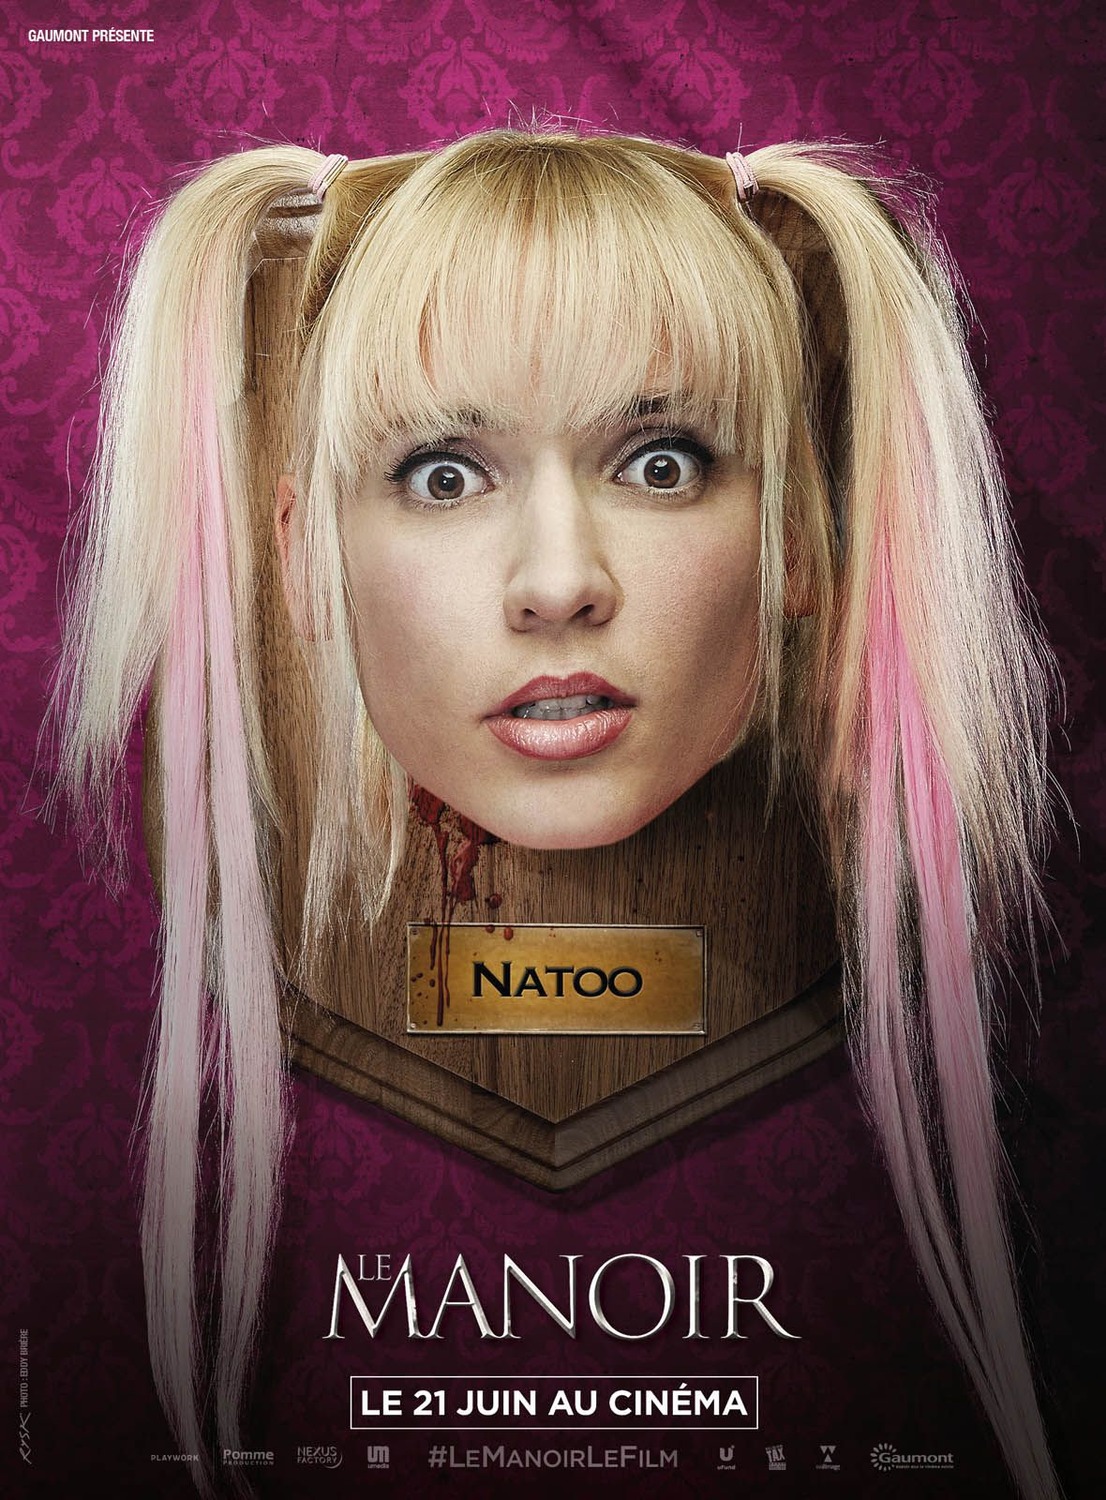 Extra Large Movie Poster Image for Le manoir (#3 of 11)